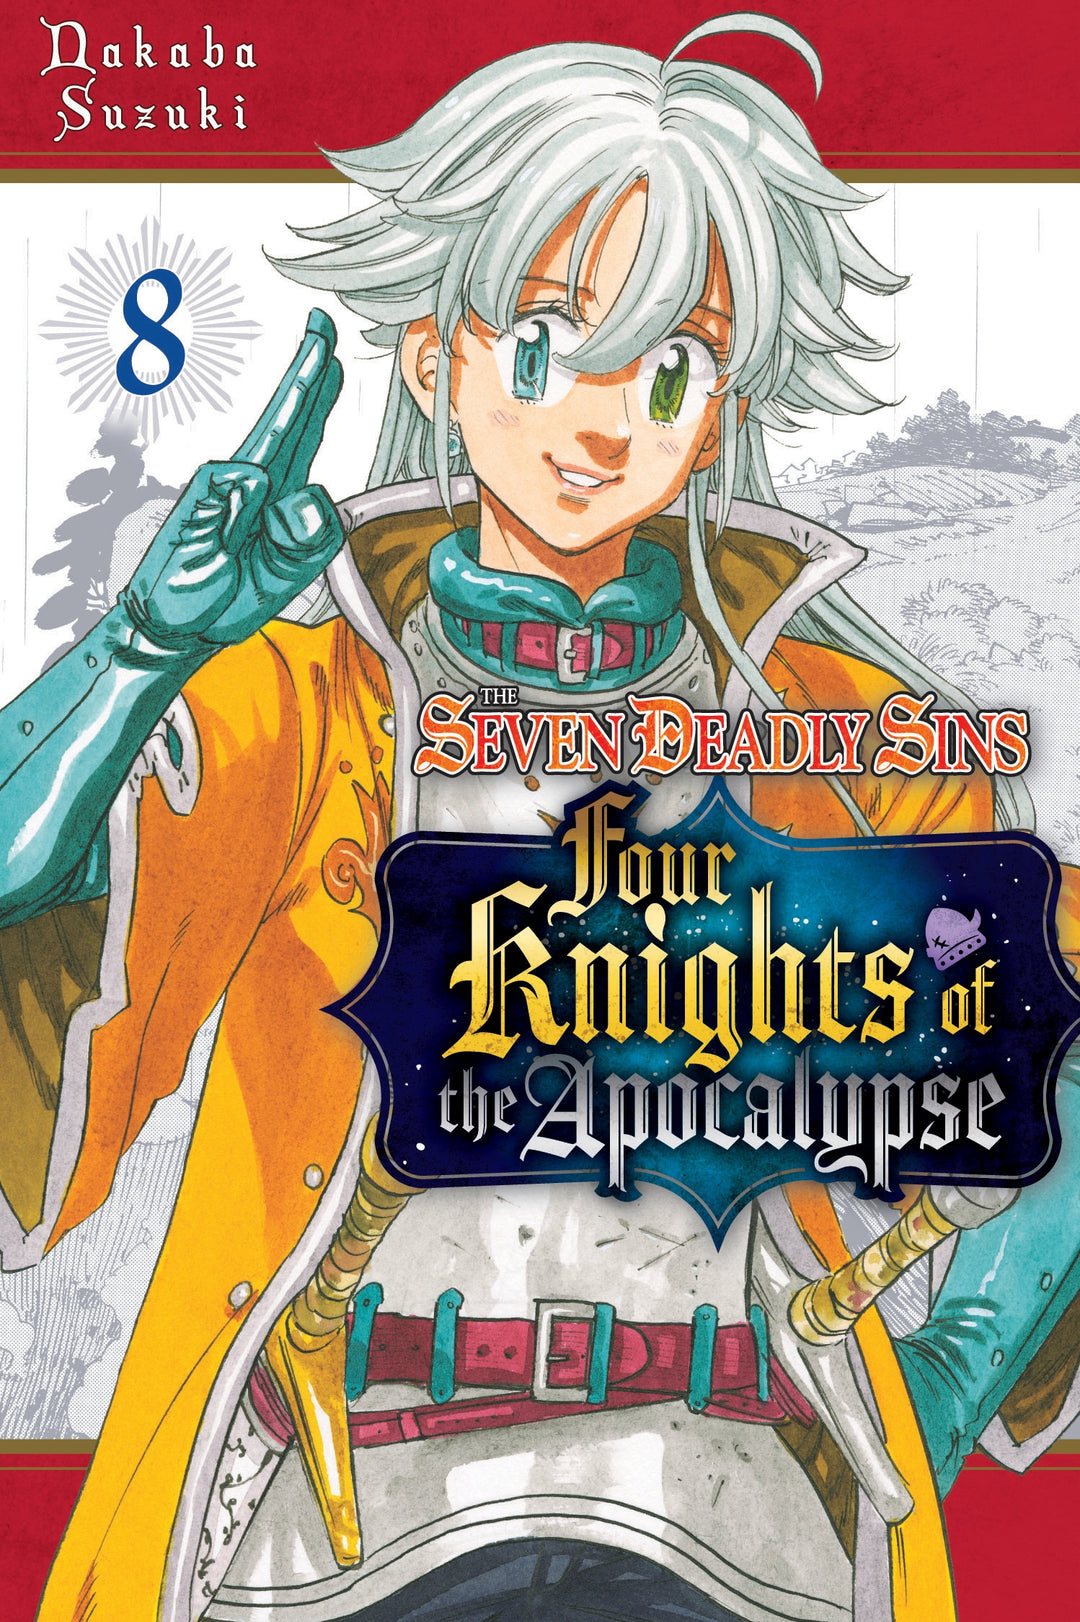 The Seven Deadly Sins Four Knights of the Apocalypse, Vol. 08